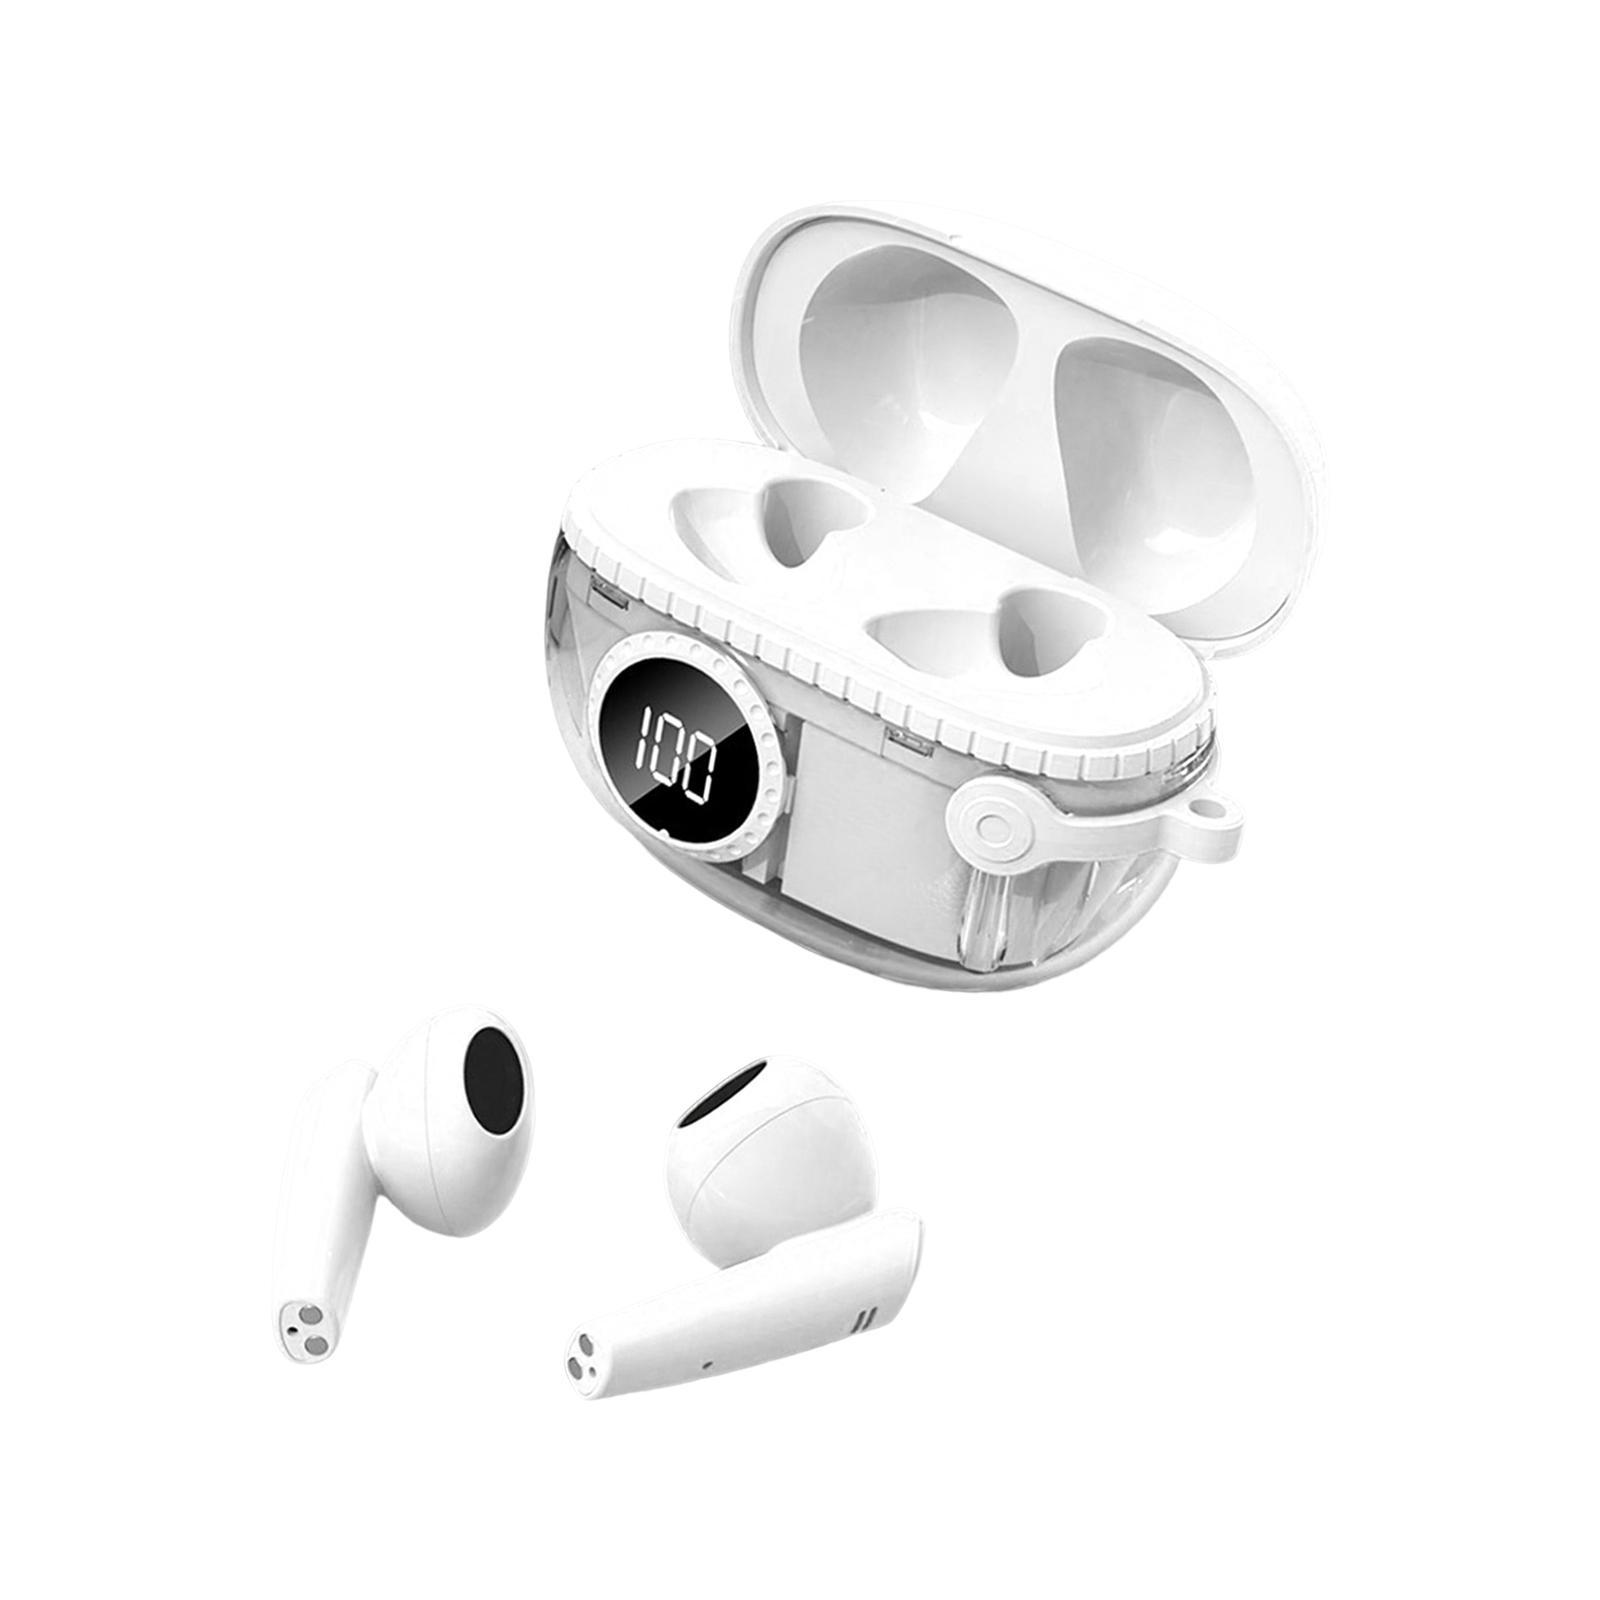 V5.3 Wireless Earphones Dual Modes Headphones for Workout